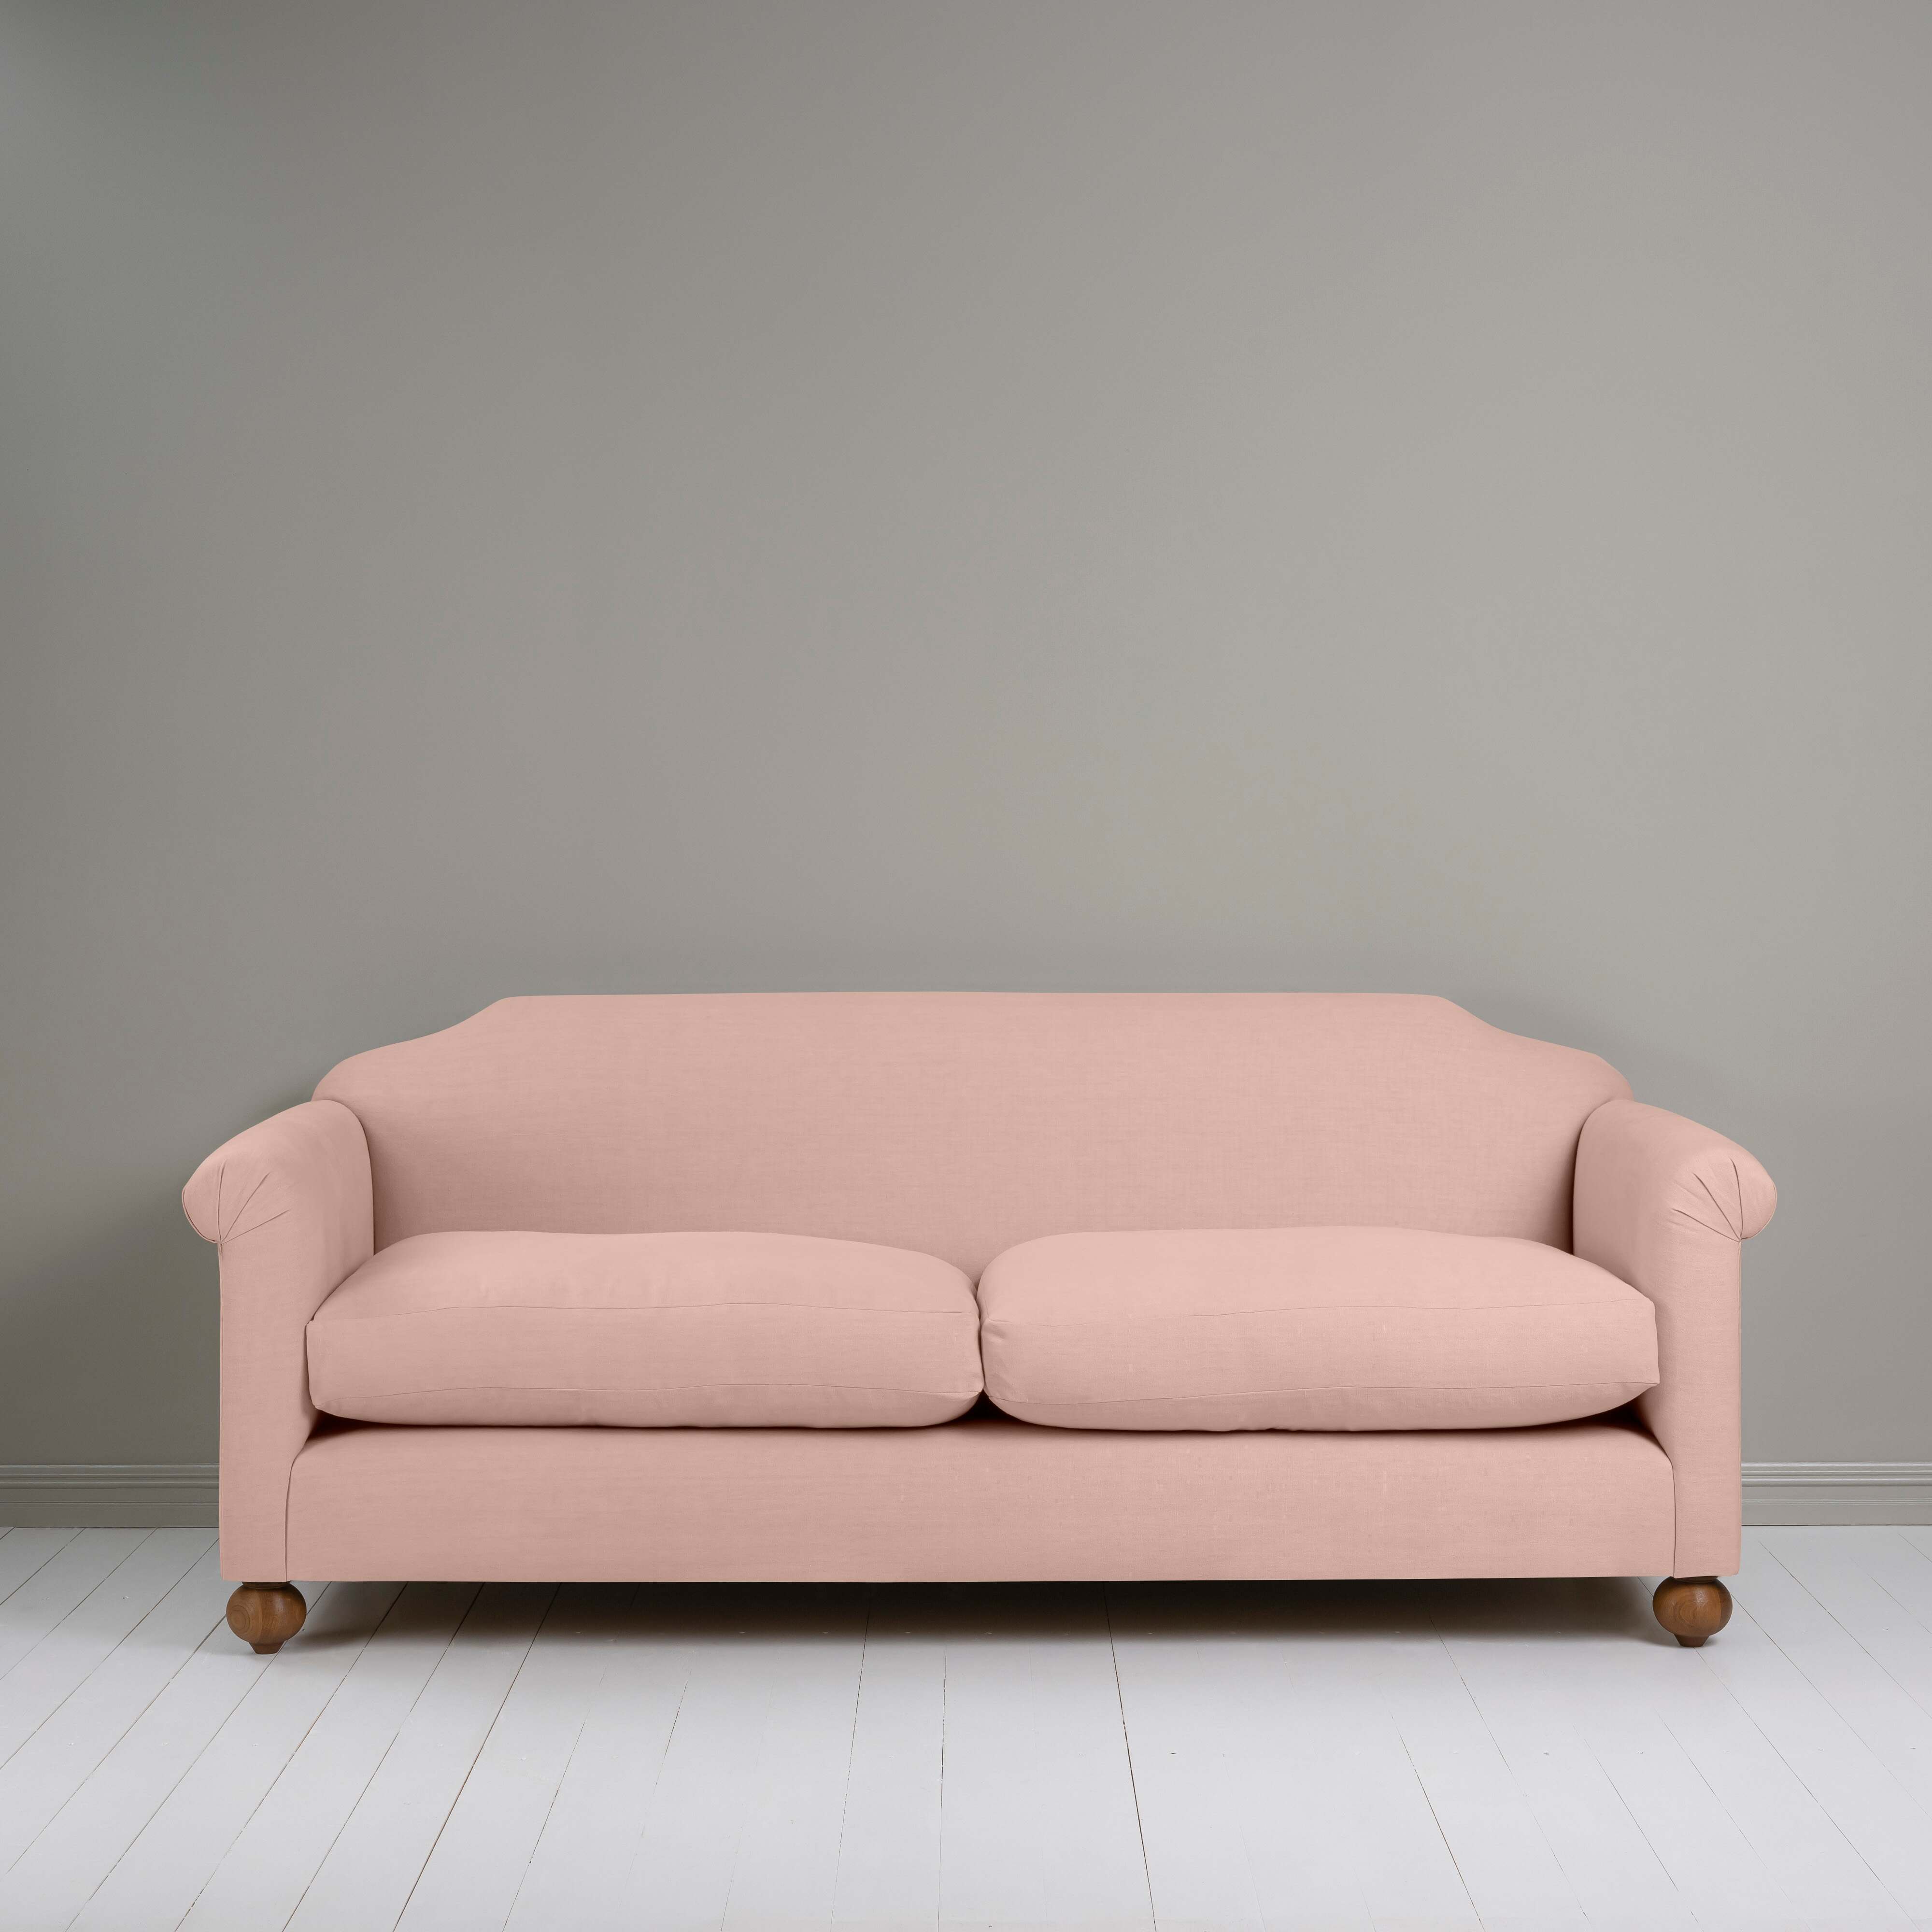  Dolittle 4 seater Sofa in Laidback Linen Dusky Pink 